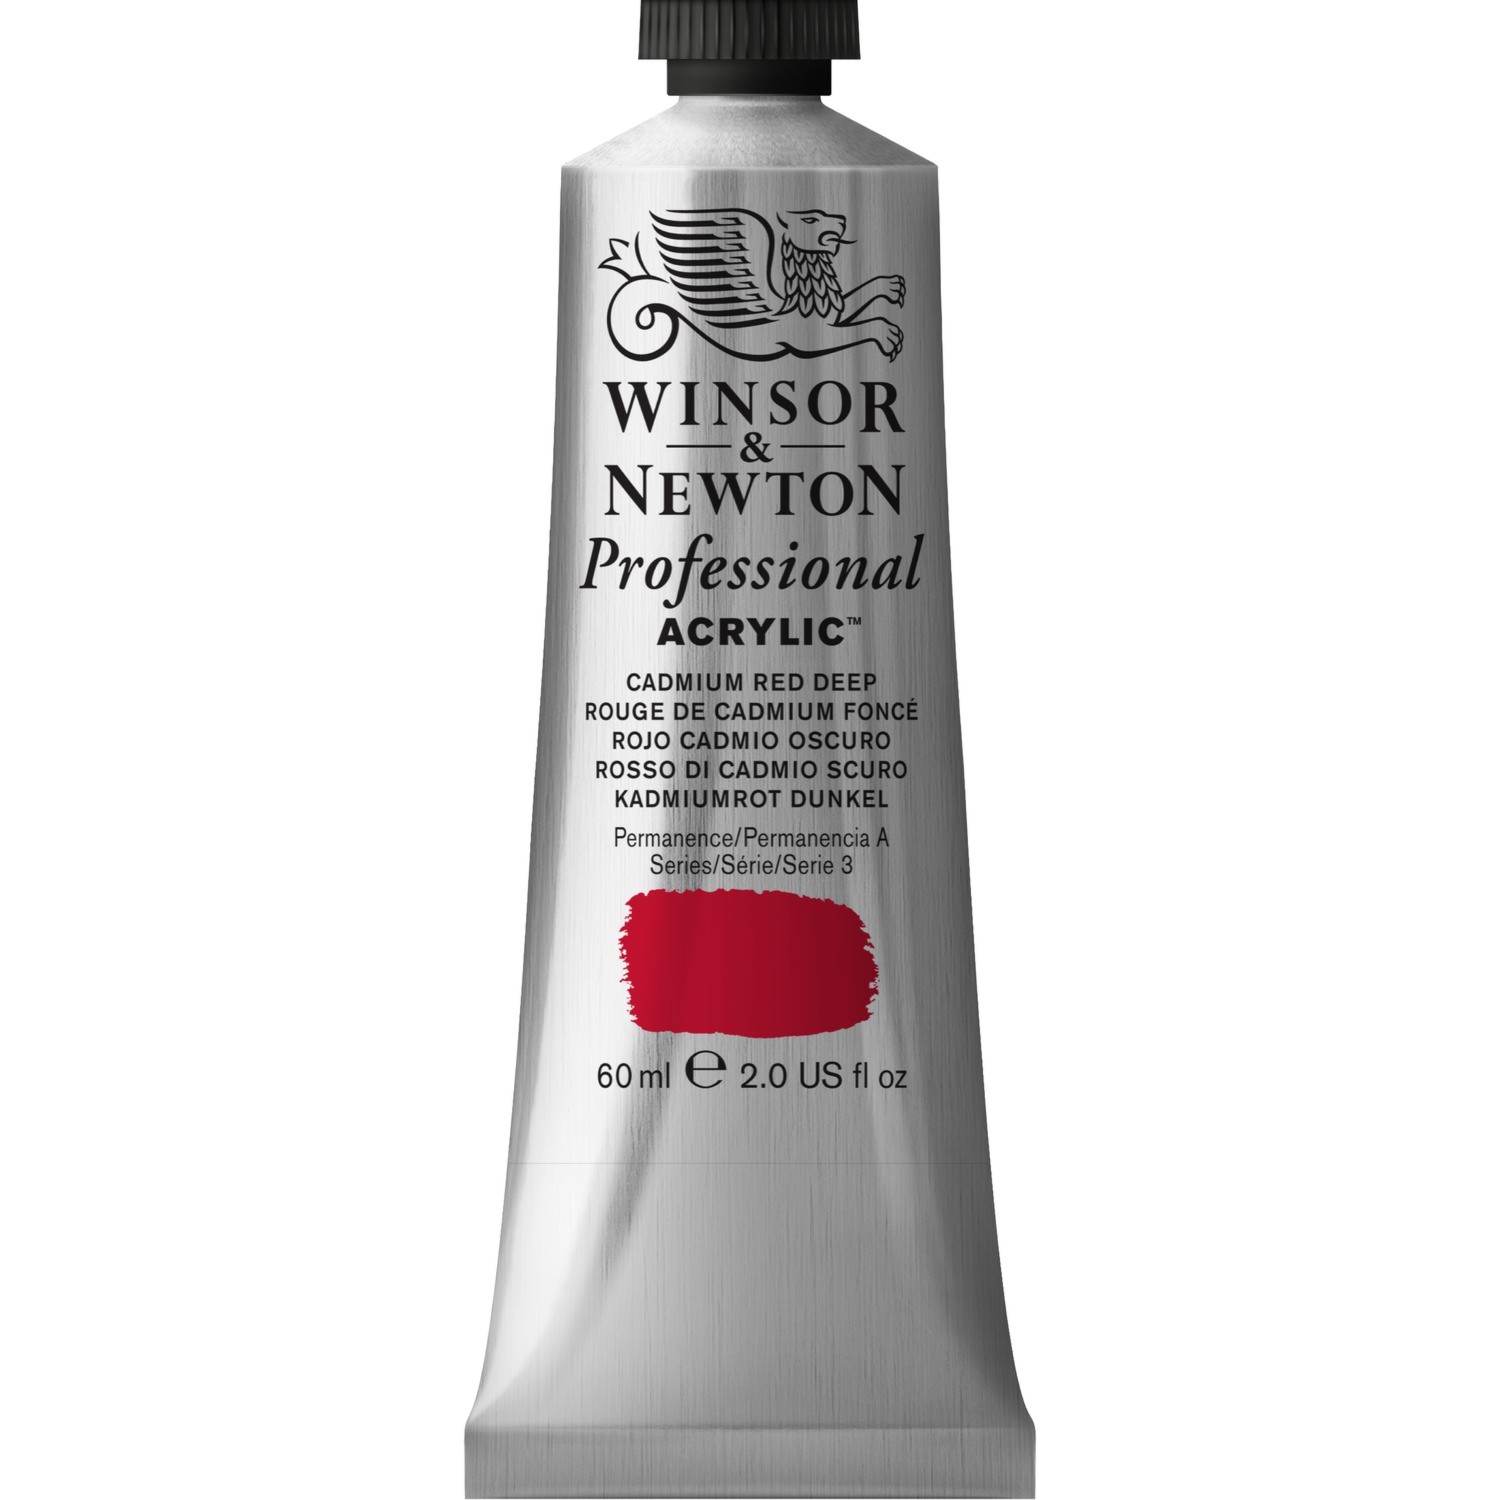 Winsor and Newton 60ml Professional Acrylic Paint - Cadmium Deep Red Image 1